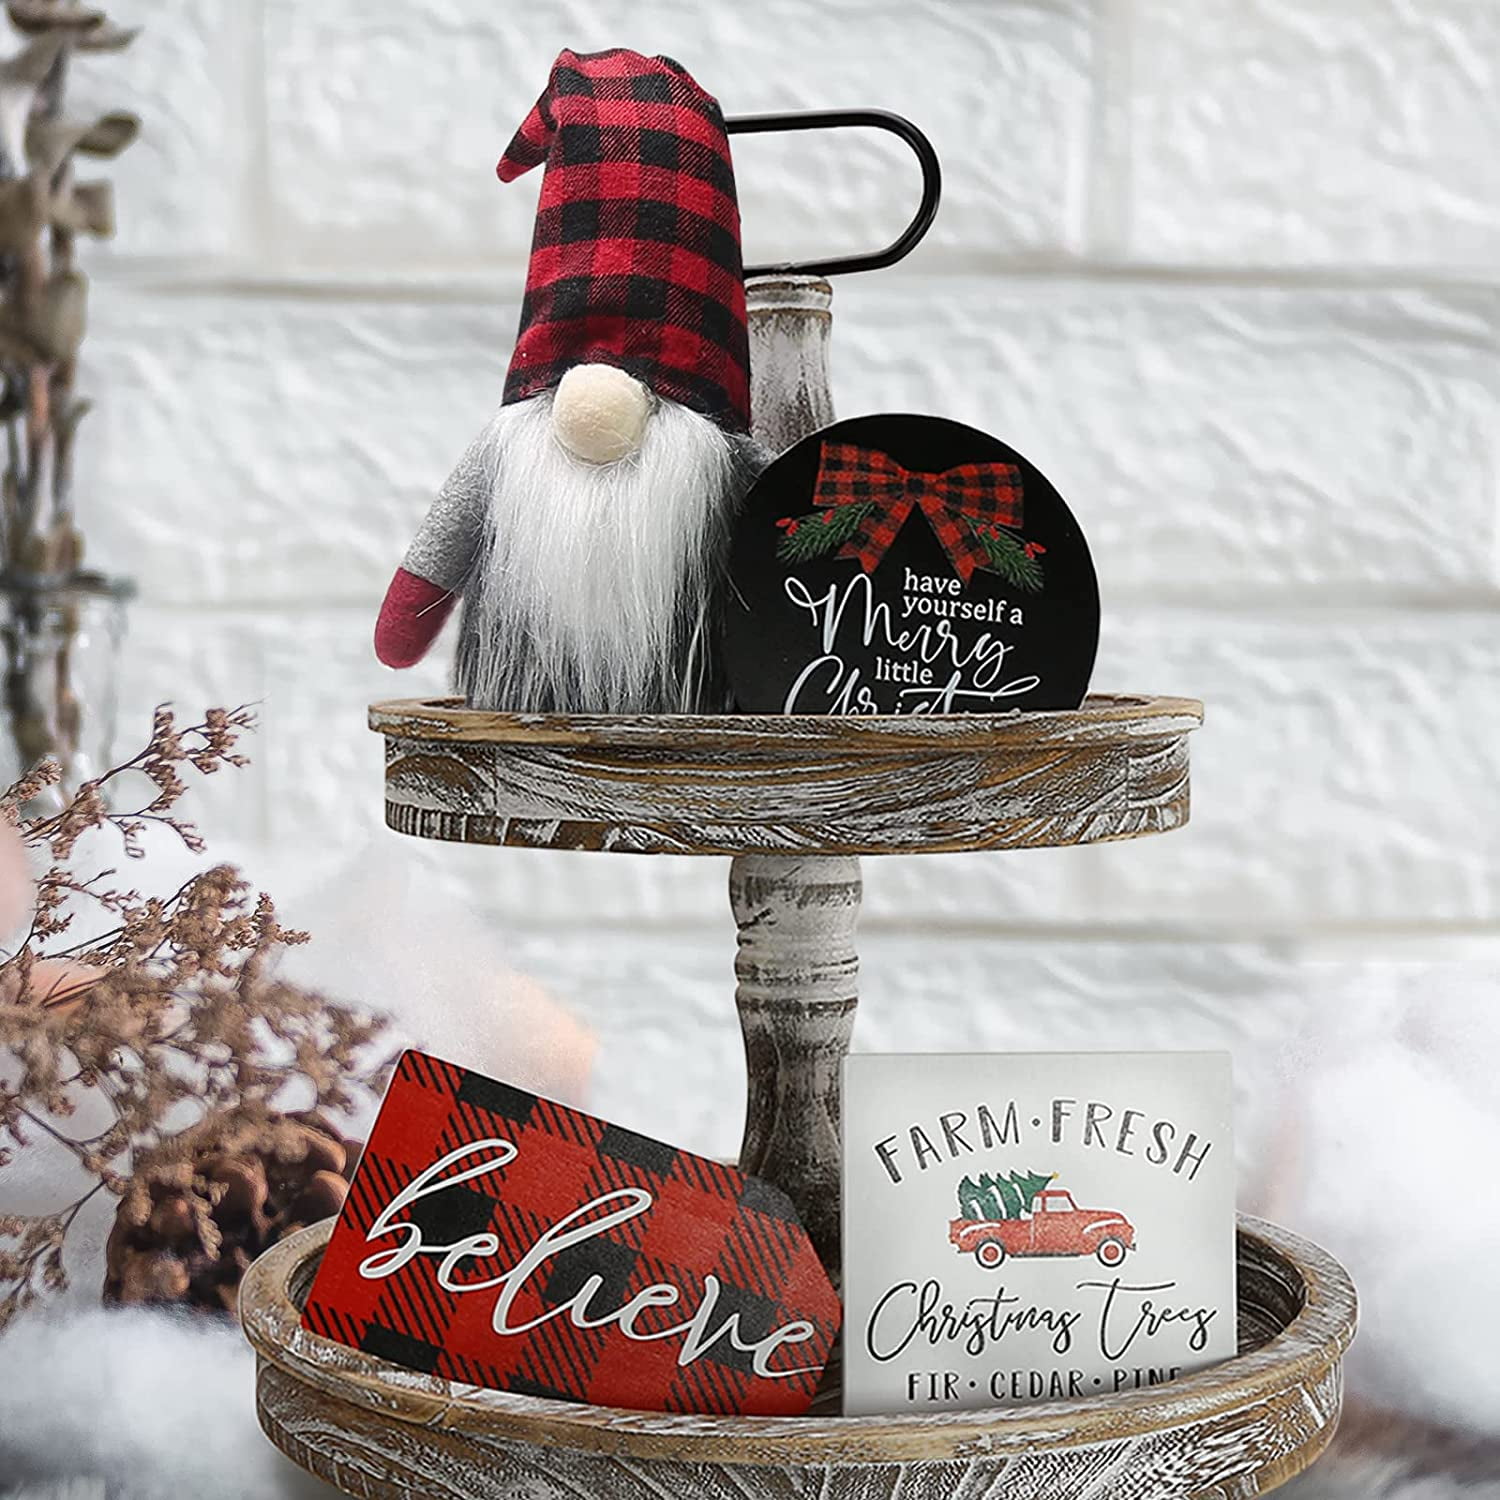 Believe Merry Christmas Wooden Signs & Buffalo Plaid Gnomes Plush Set Farmhouse Rustic Tiered Tray Country Decor Farm Fresh Christmas Decorations Indoor for Home Room Table Mantle Fireplace A